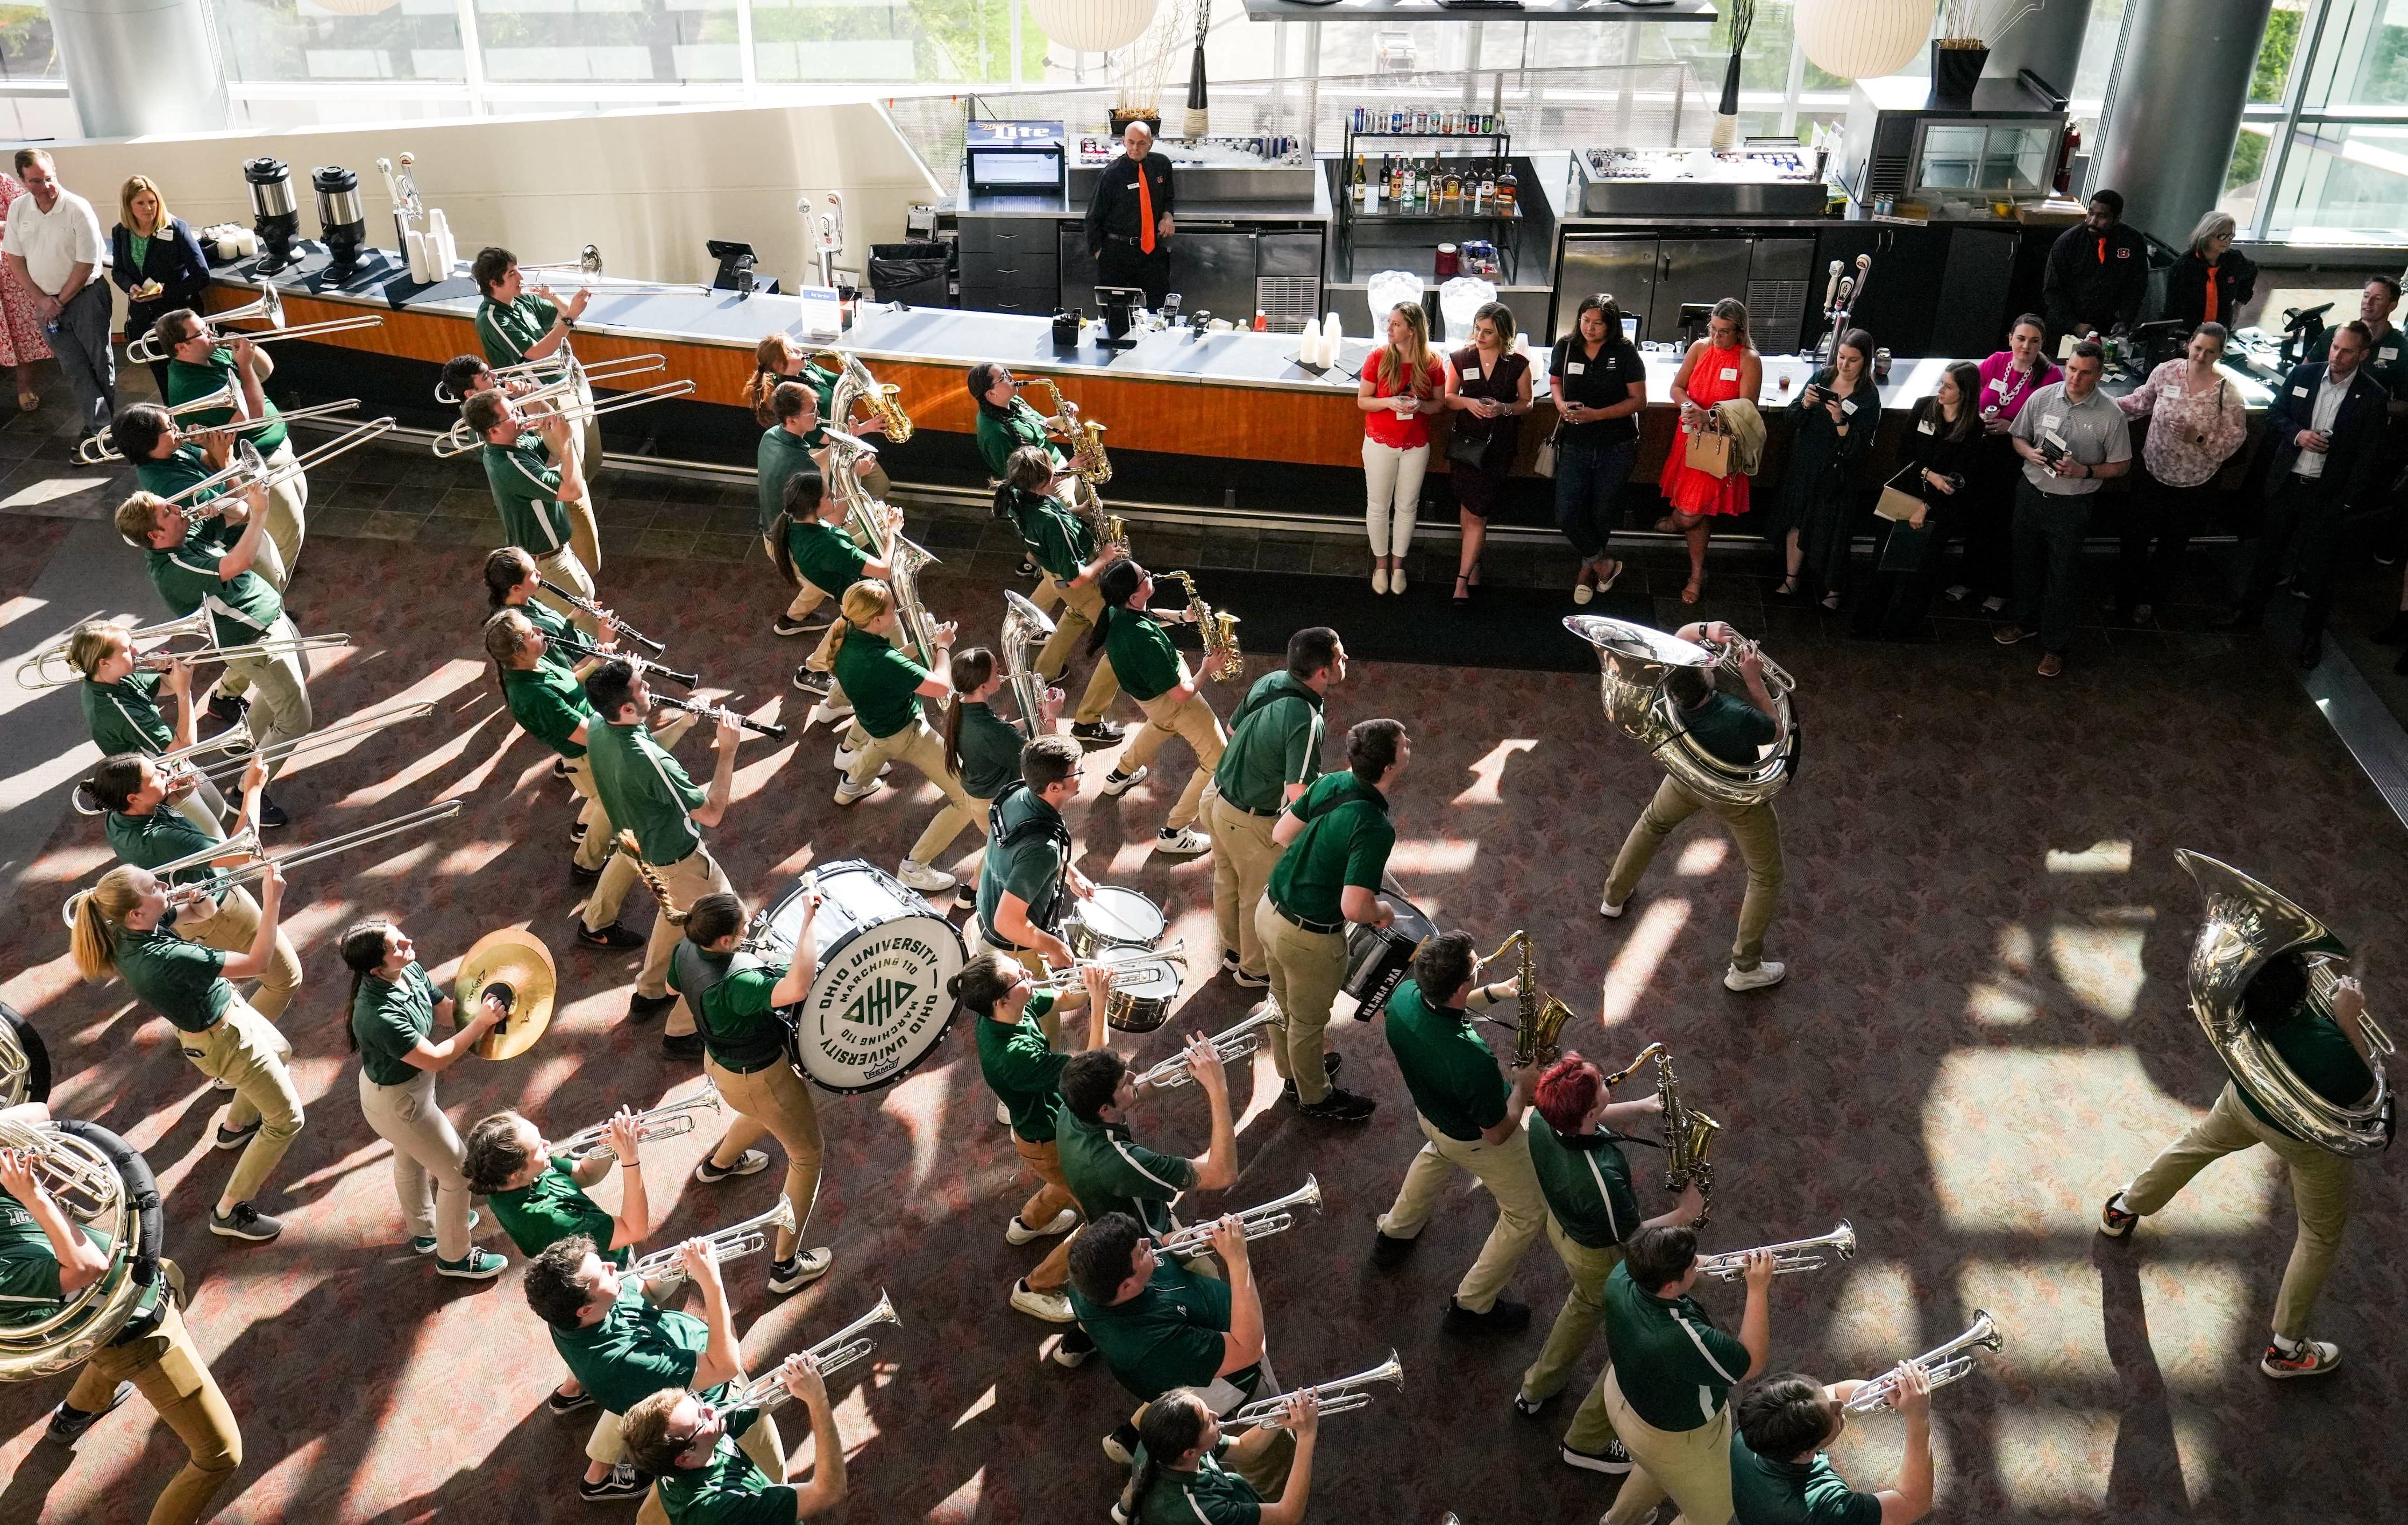 The Marching 110 performs at the Bobcat Networking Event